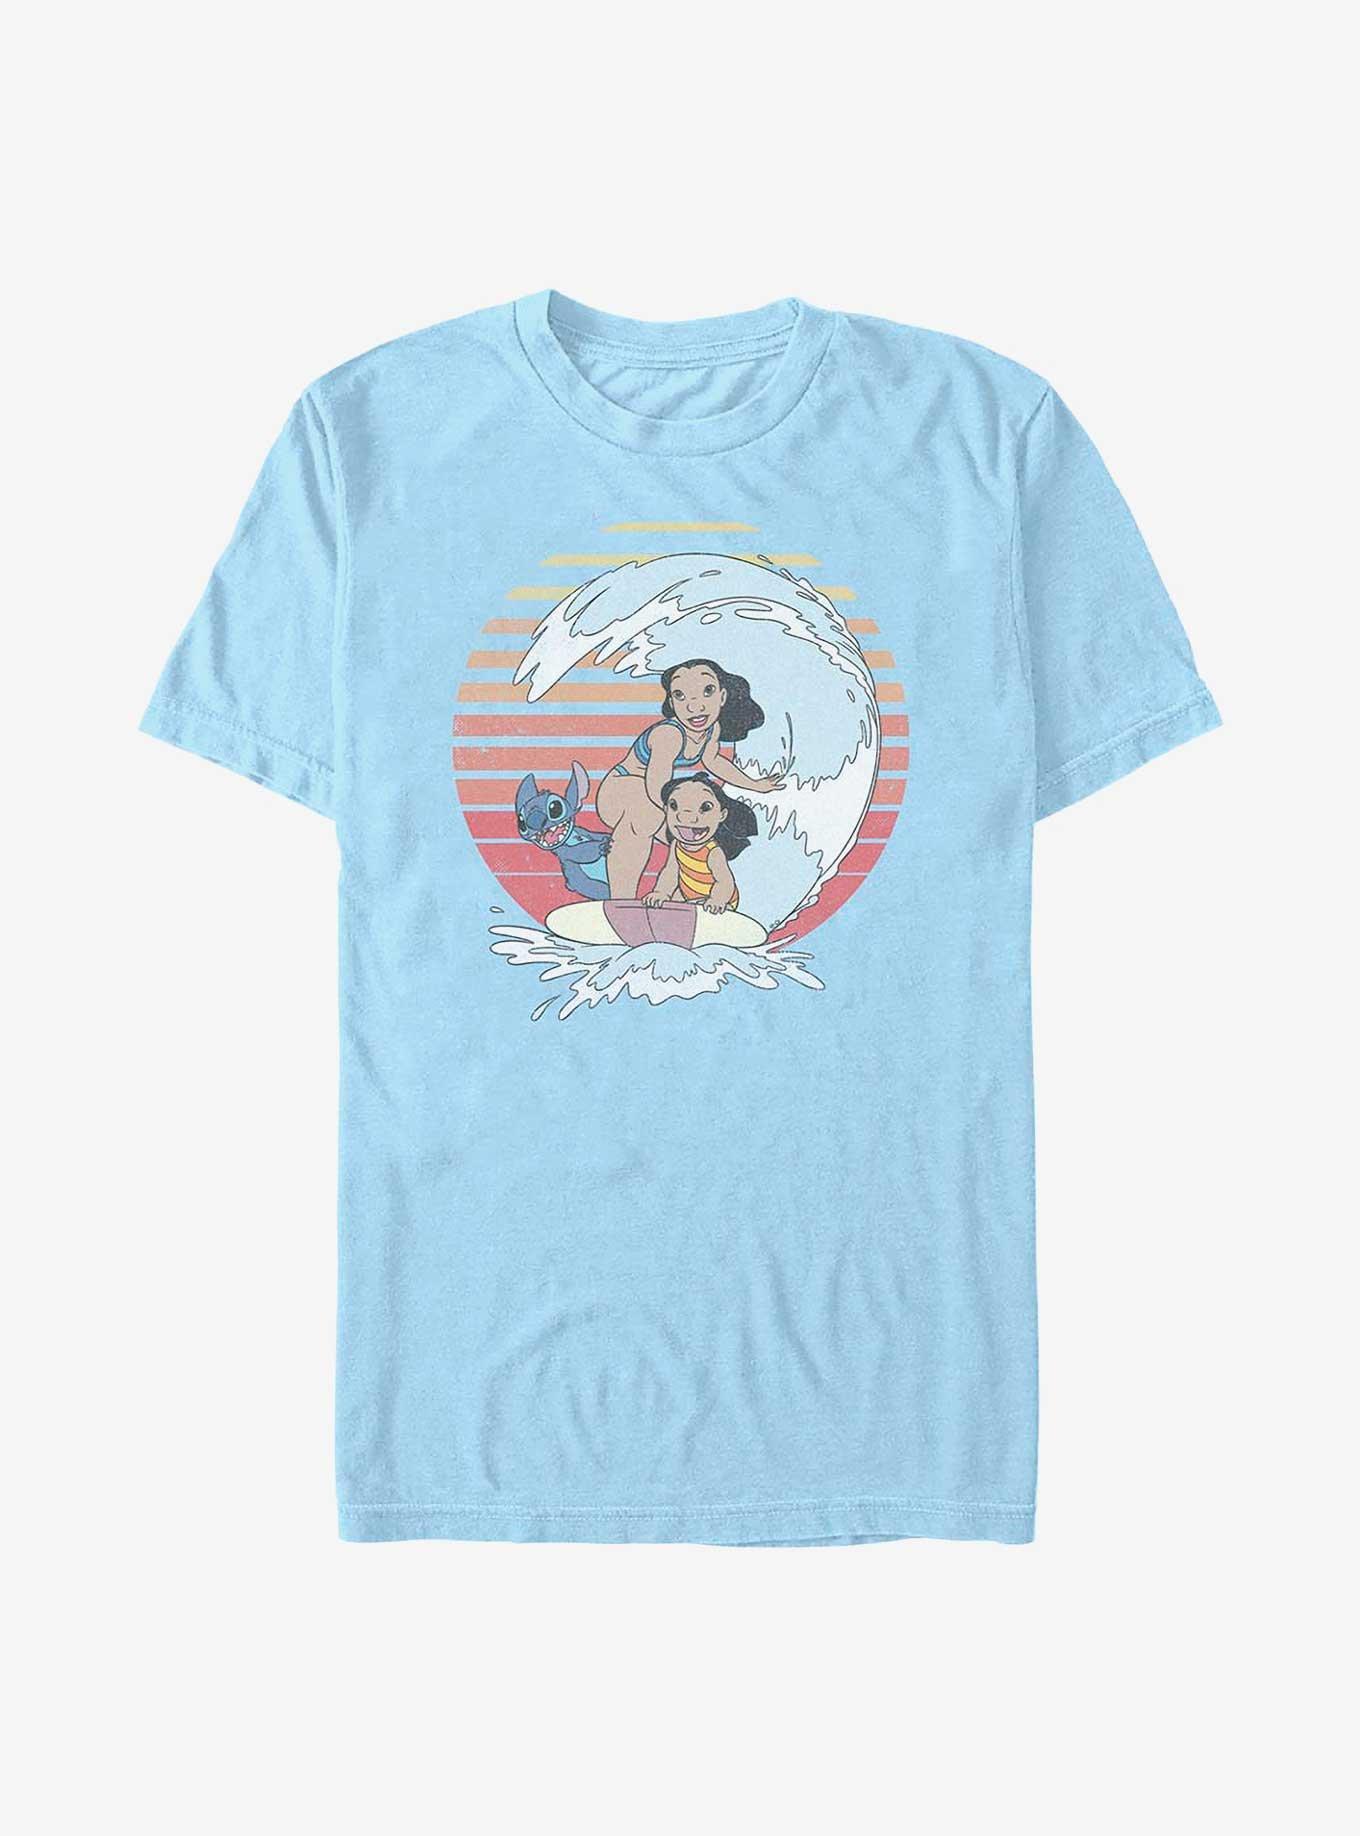 Disney Lilo & Stitch Family Surfing T-Shirt | Hot Topic